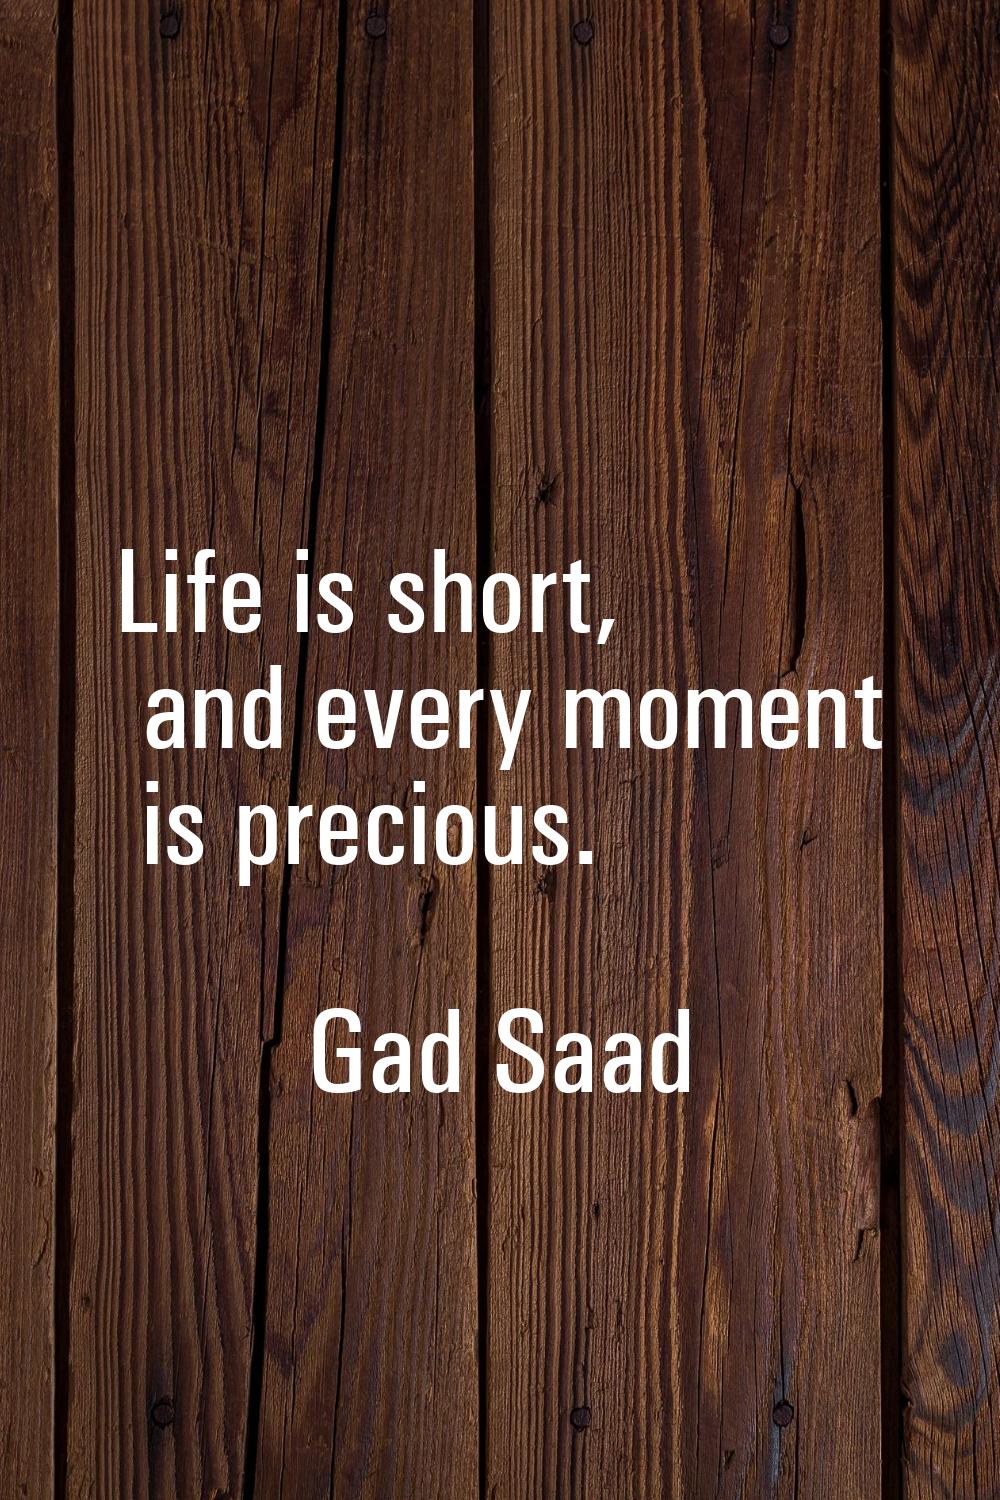 Life is short, and every moment is precious.